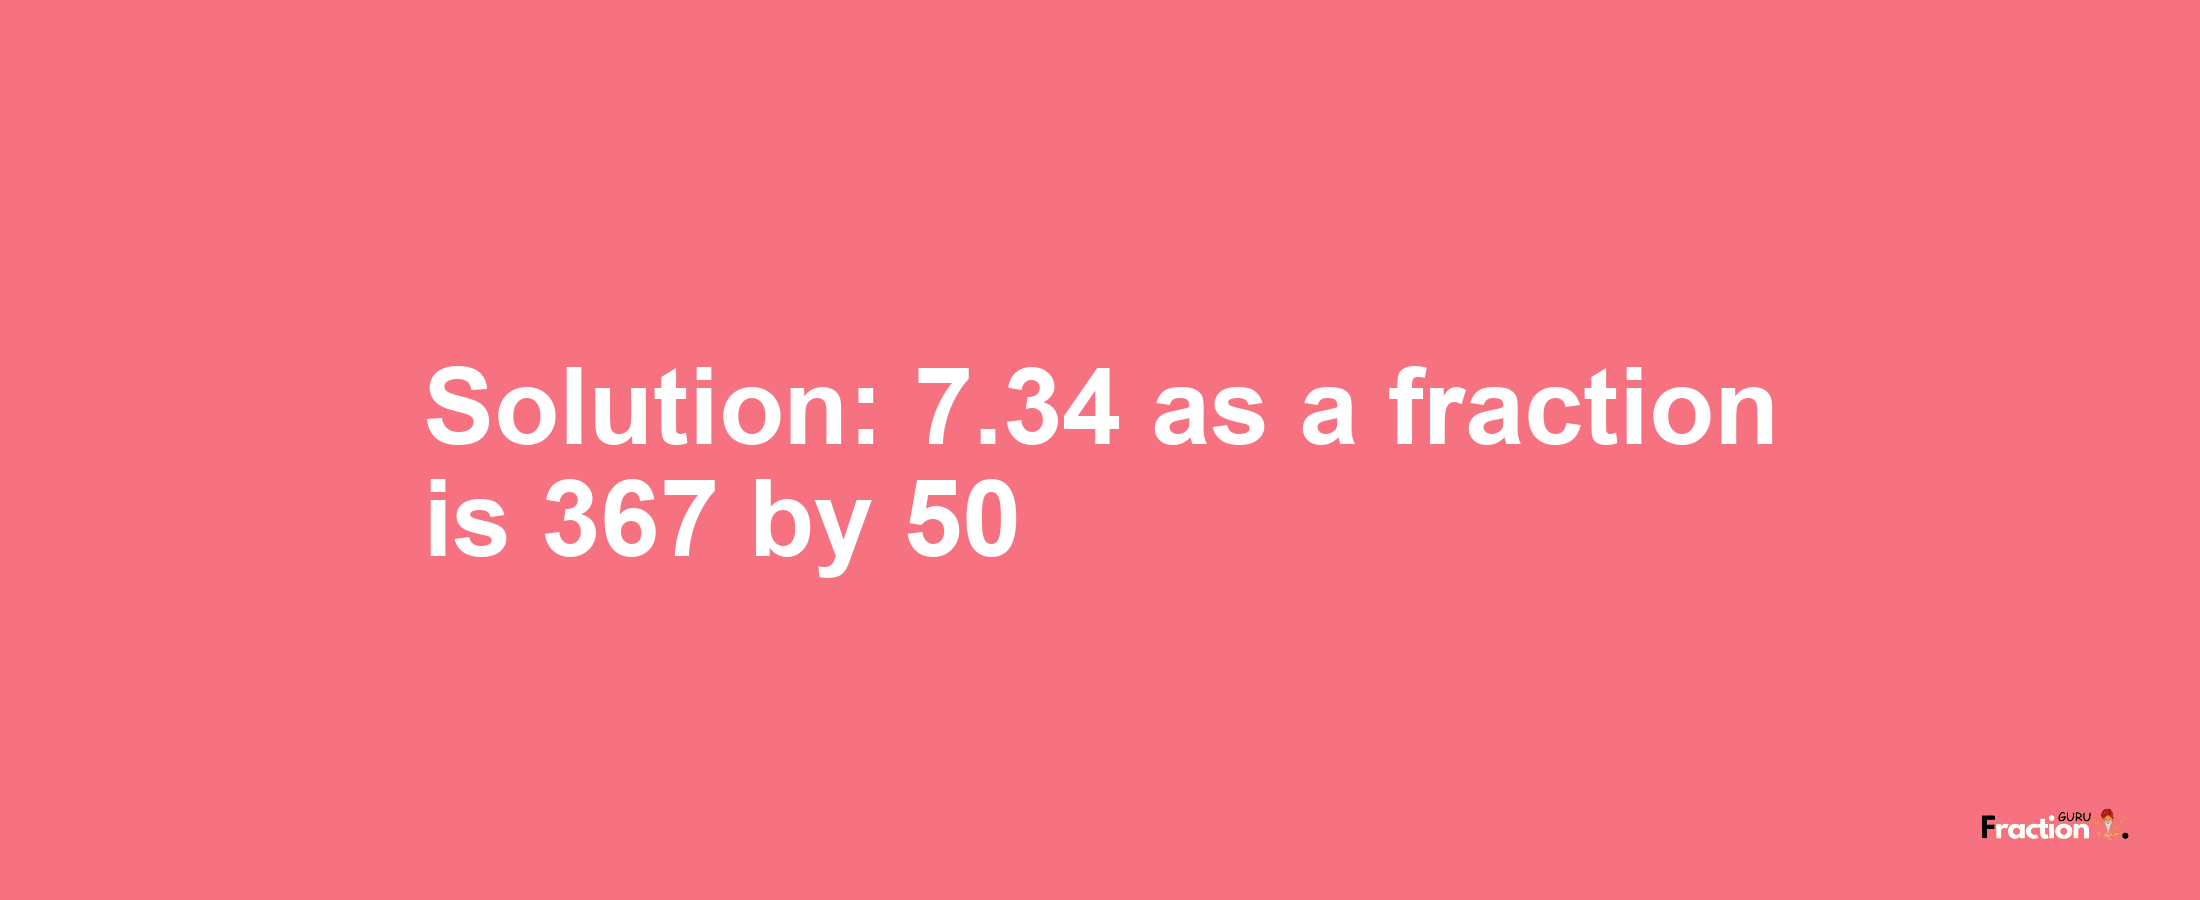 Solution:7.34 as a fraction is 367/50